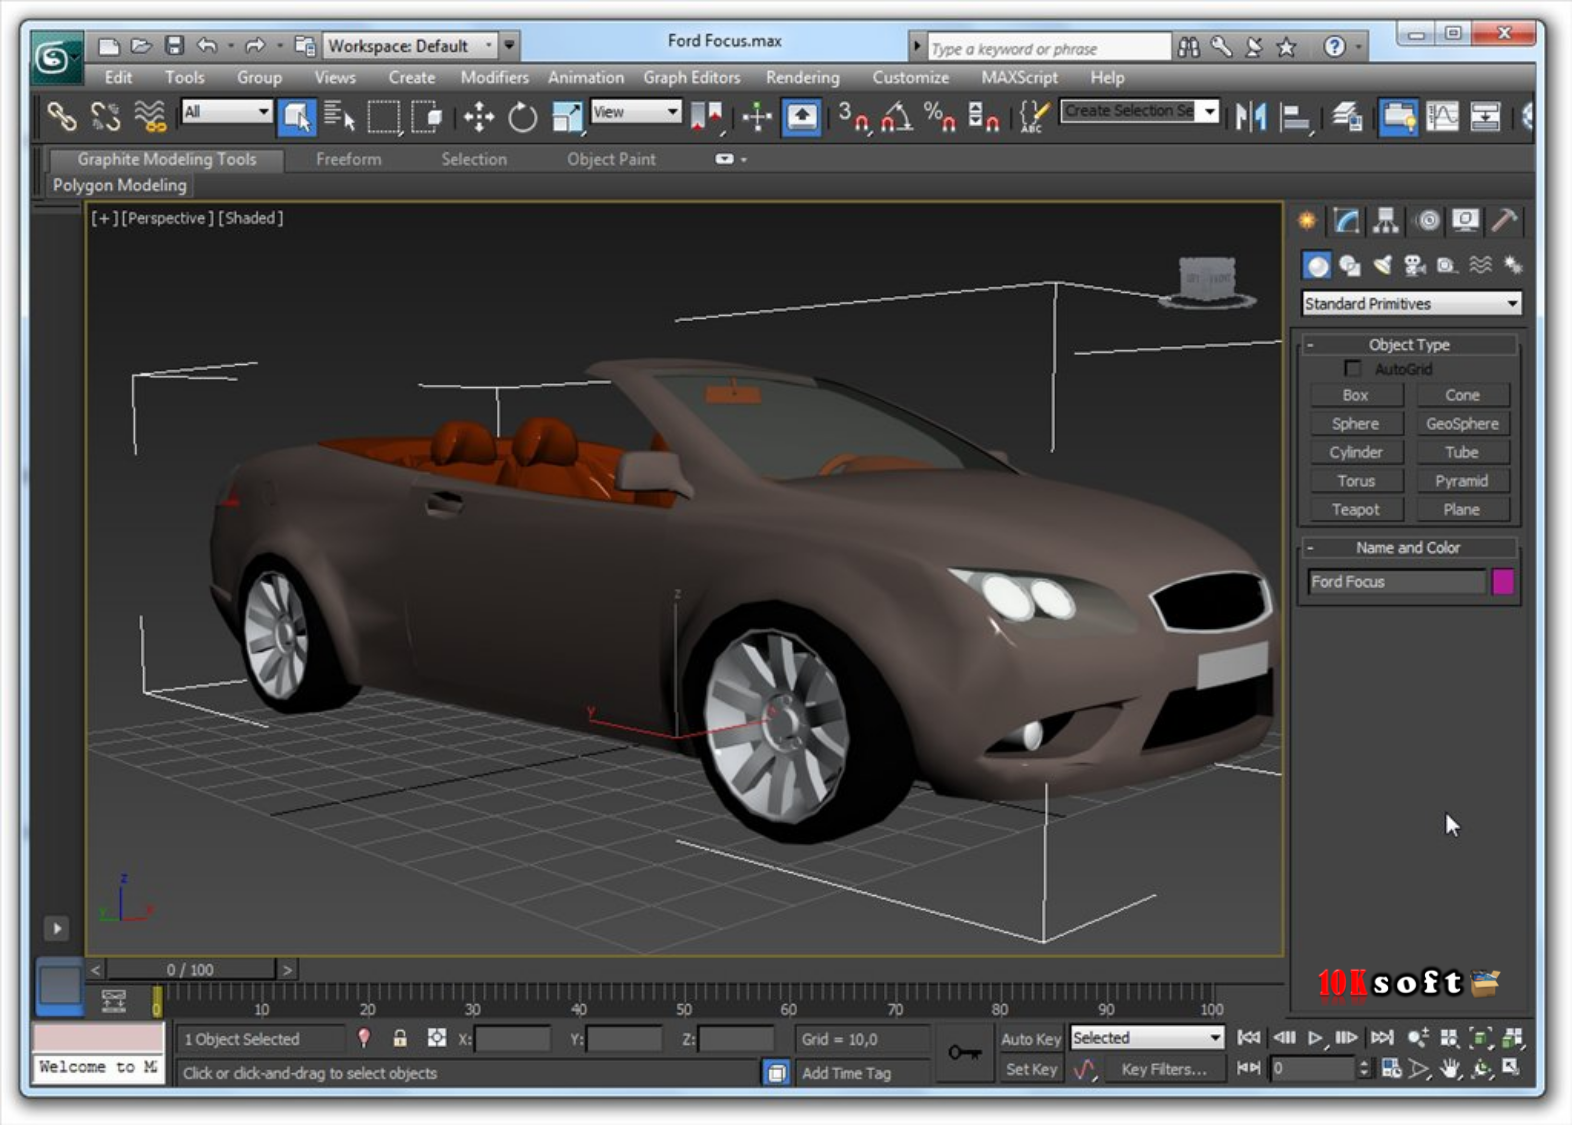 3ds max 2014 32 bit software free download full version